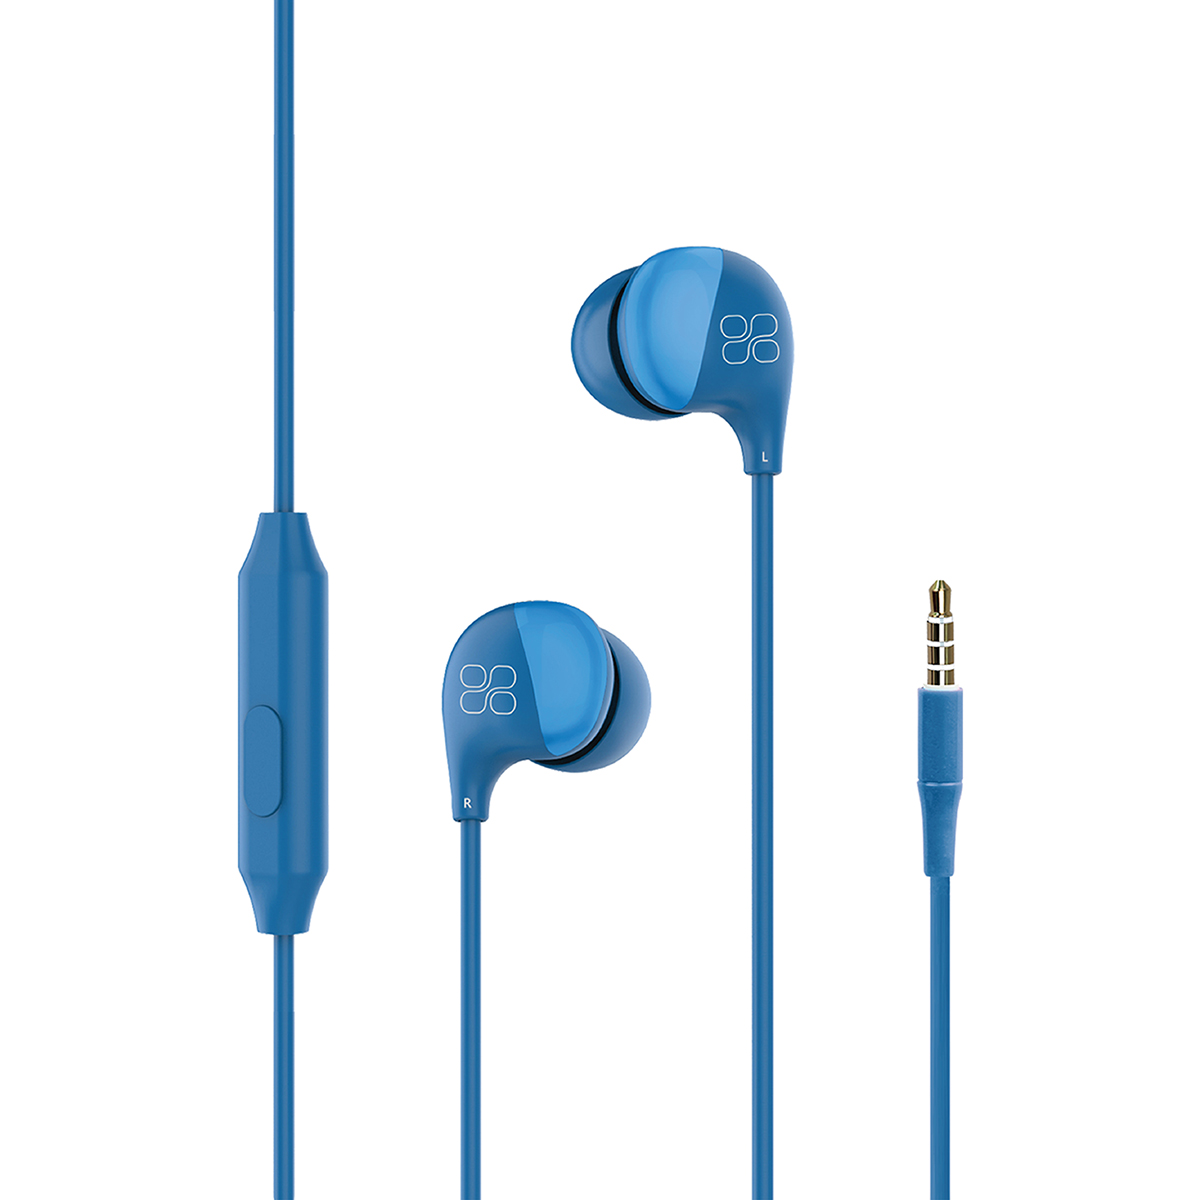 PROMATE COMET HD Stero In-Ear Wired Earphone with Microphone ( BLUE )